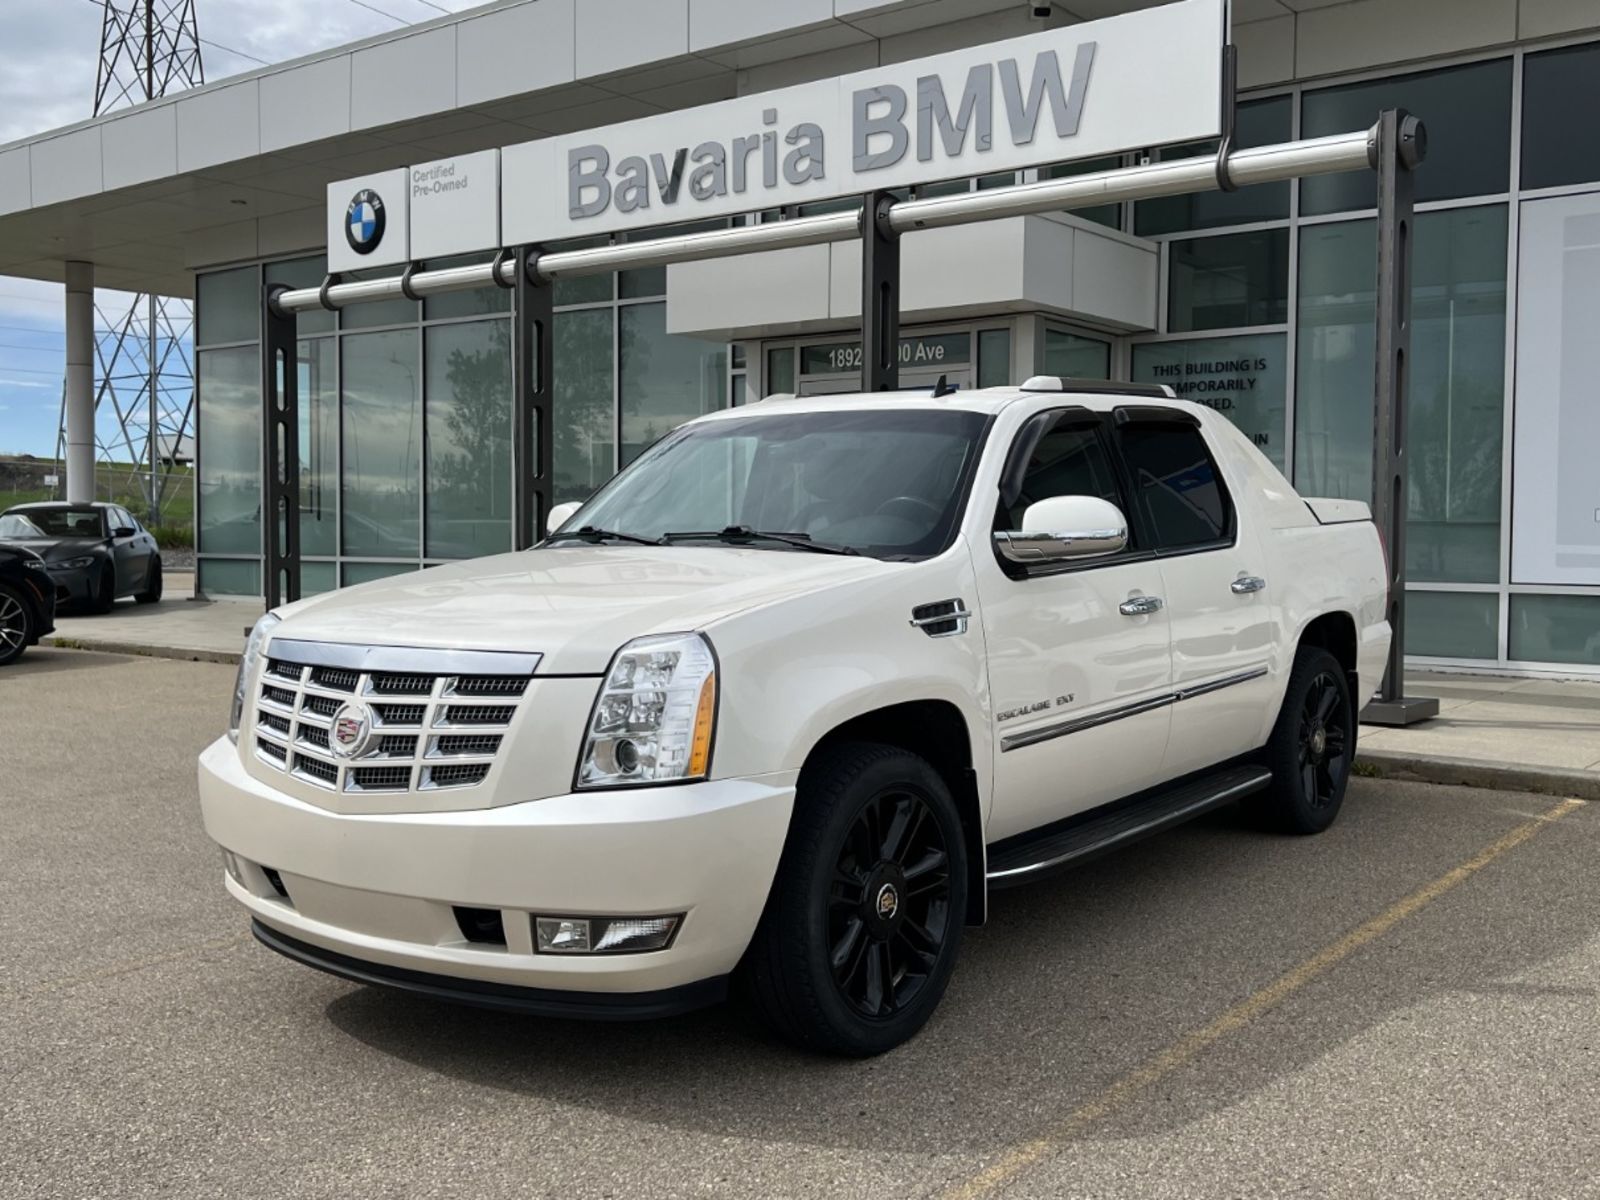 2012 Cadillac Escalade EXT Luxury | Leather Seats | Heated & Cooled Seats | S